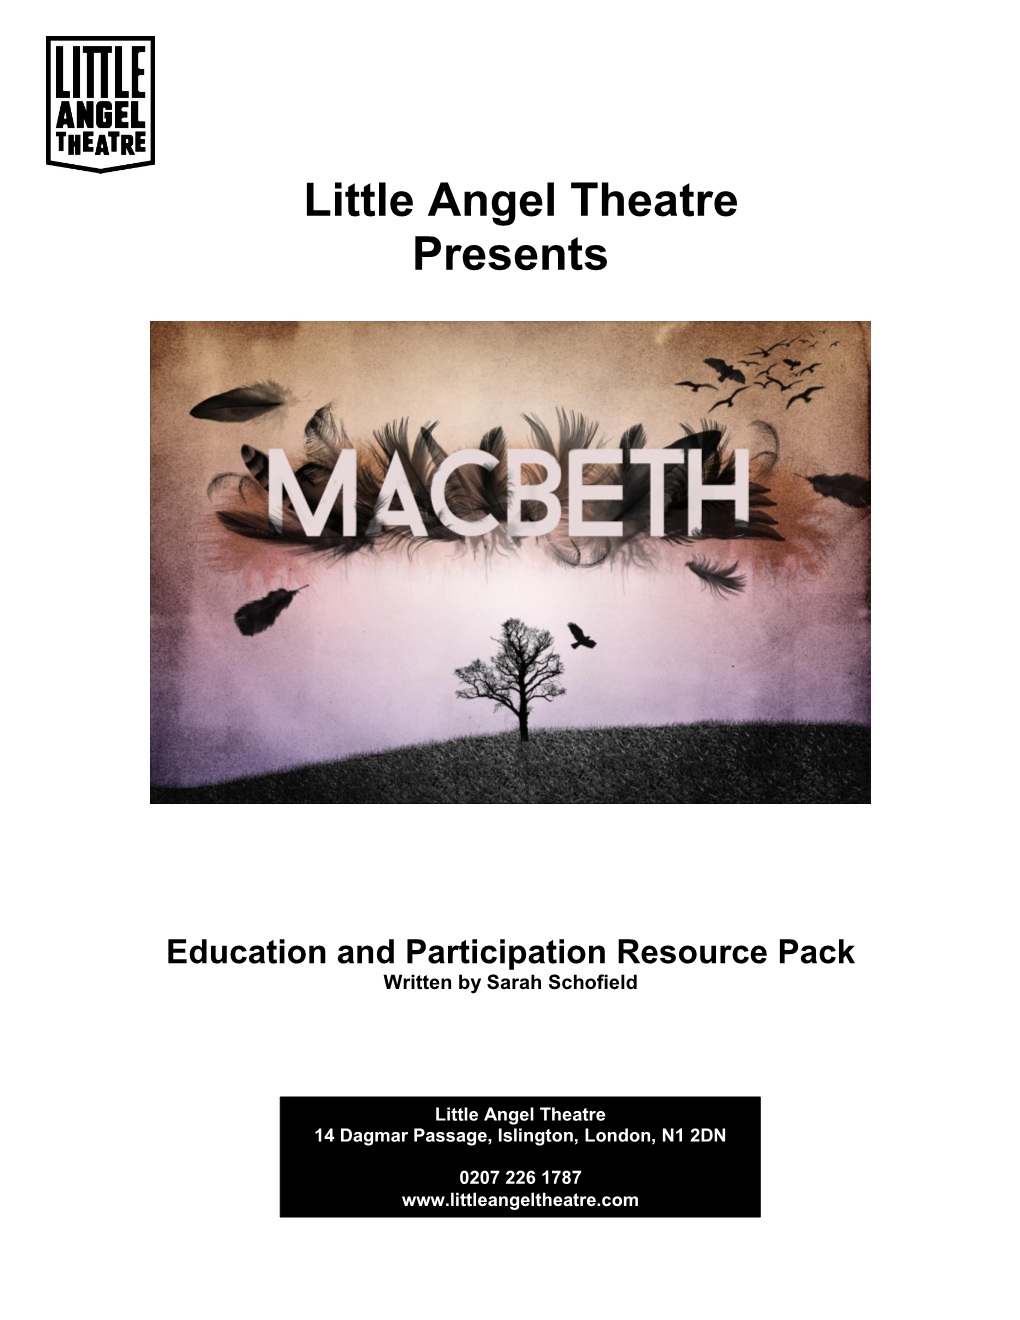 Little Angel Theatre Macbeth with Puppets